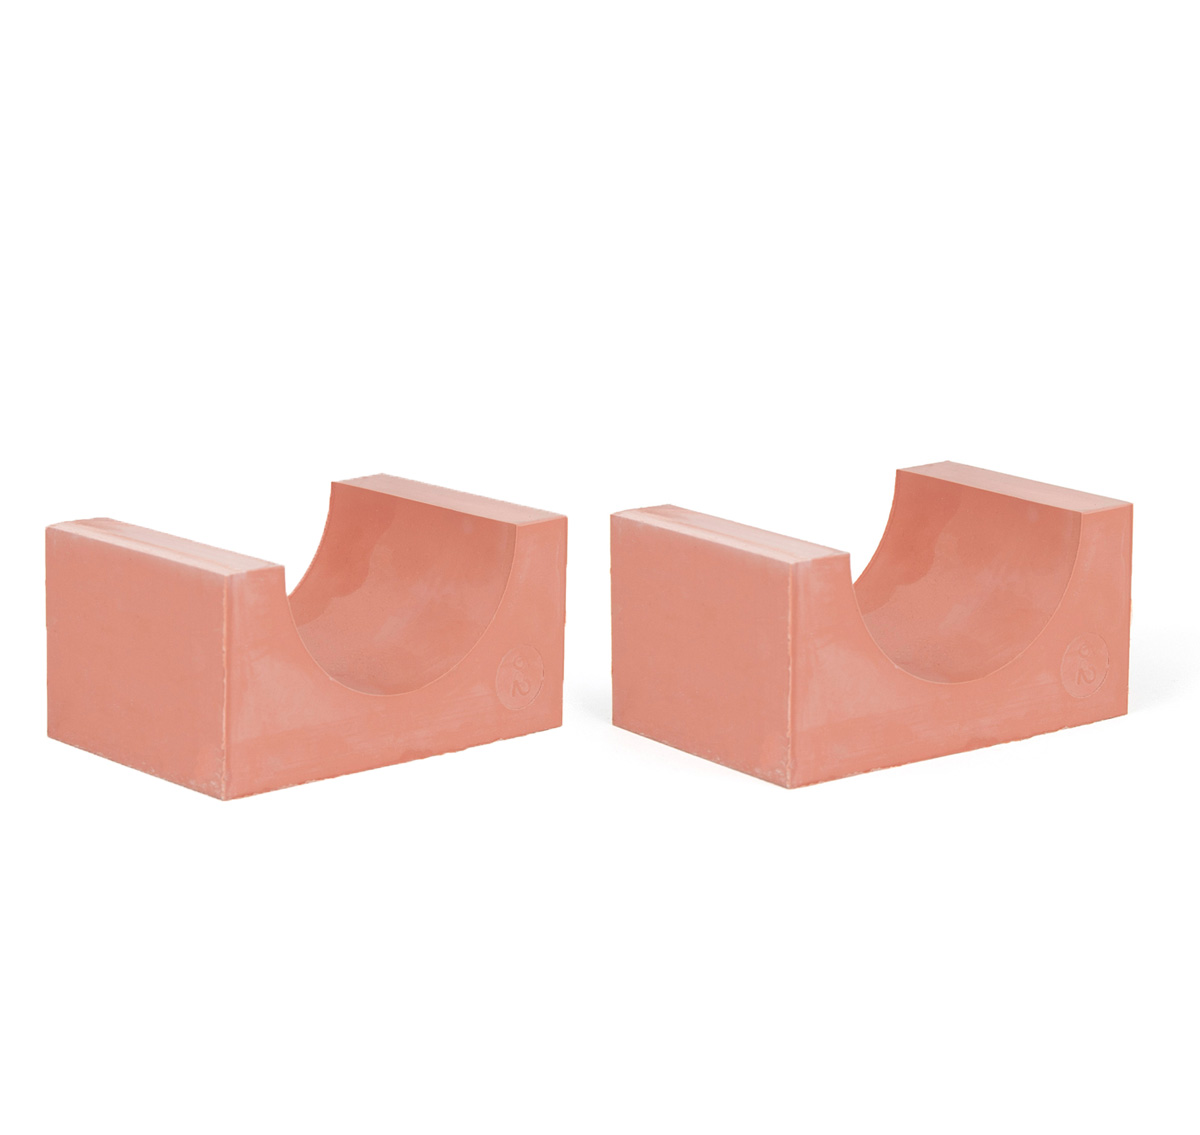 90-62*2 Set of 2 half insert block lycron, 90-62 for cable/pipe diam. 61.5-63.5mm